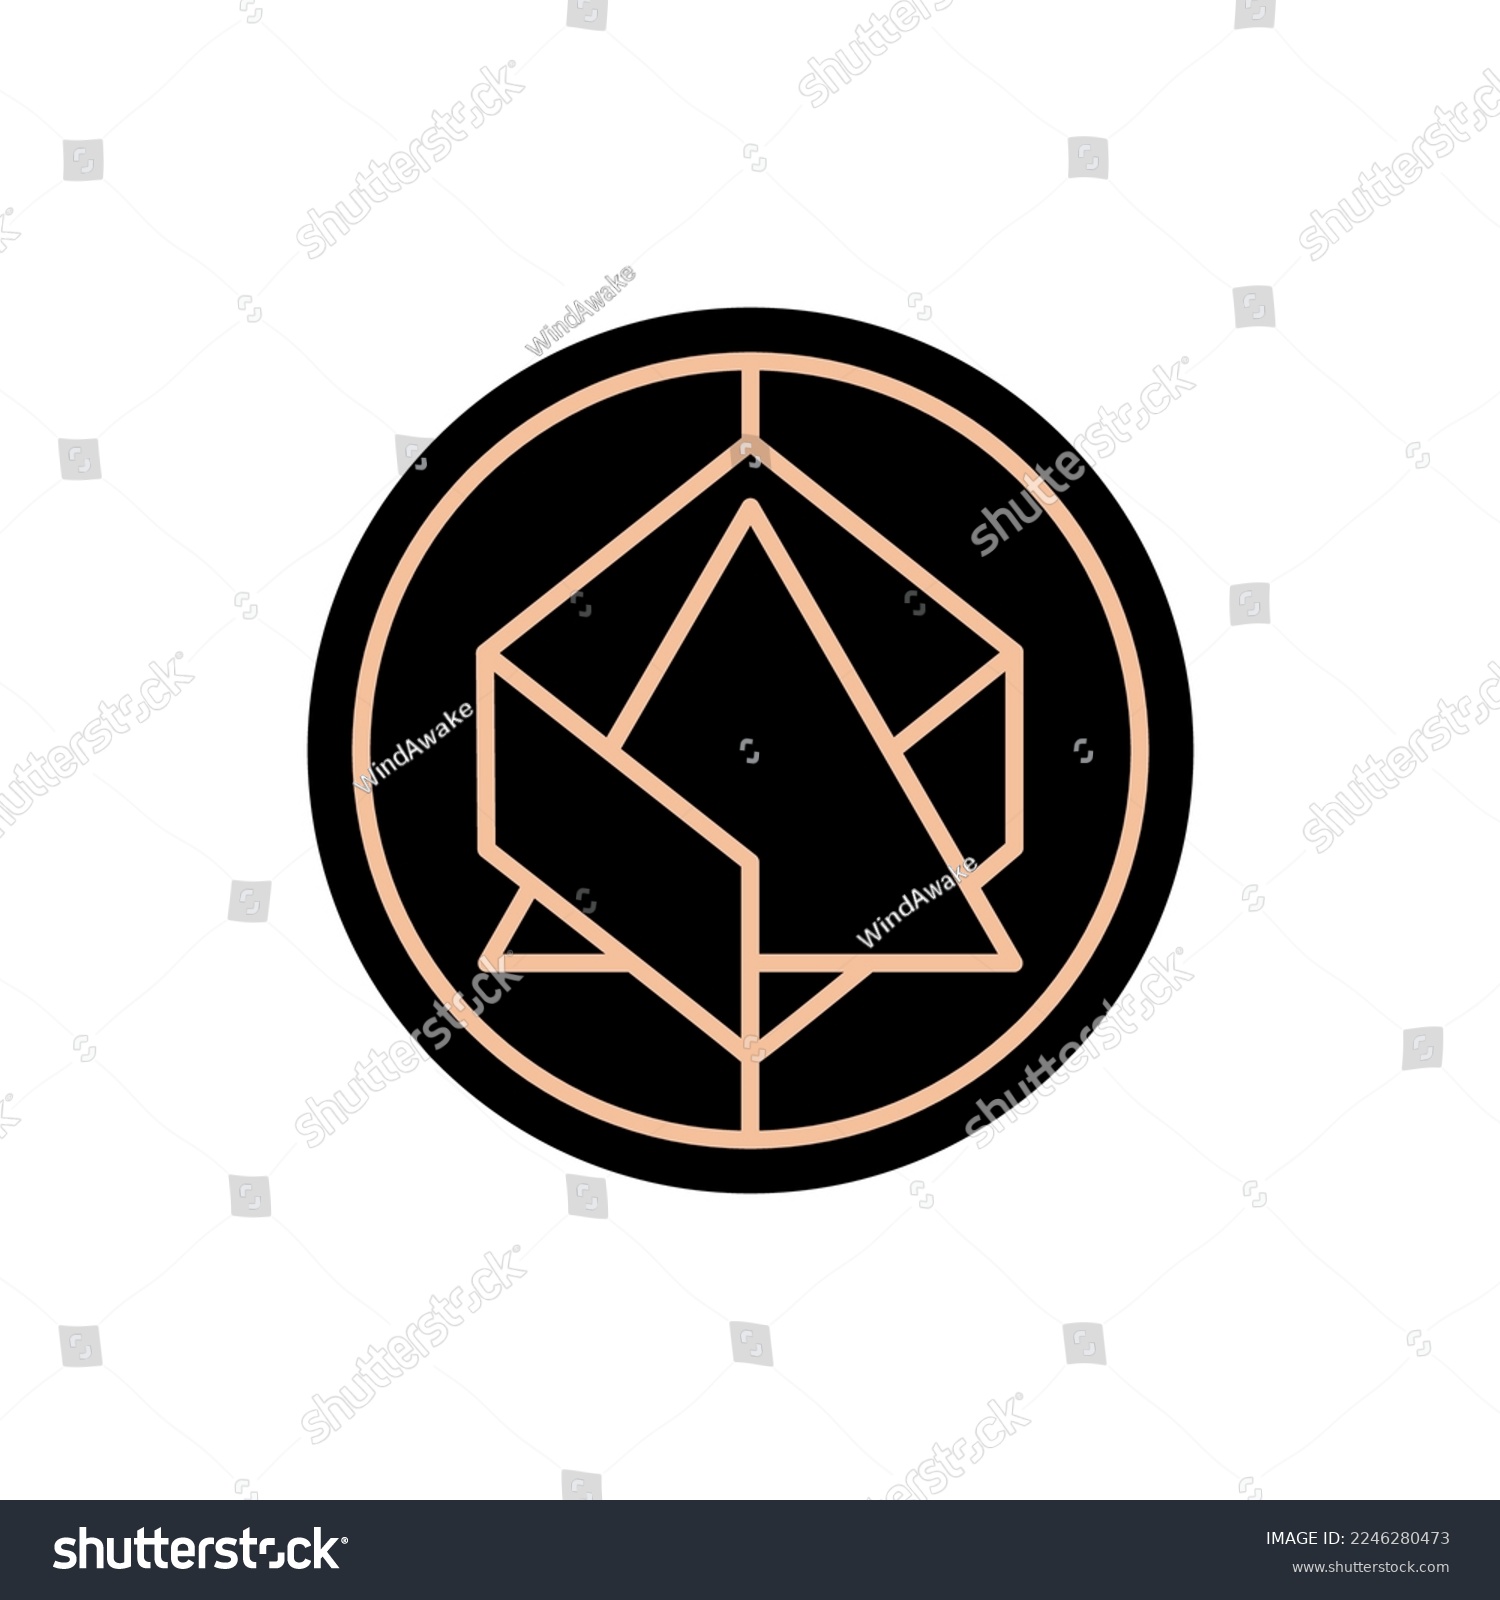 SVG of Alchemix (ALCX) coin icon isolated on white background. svg